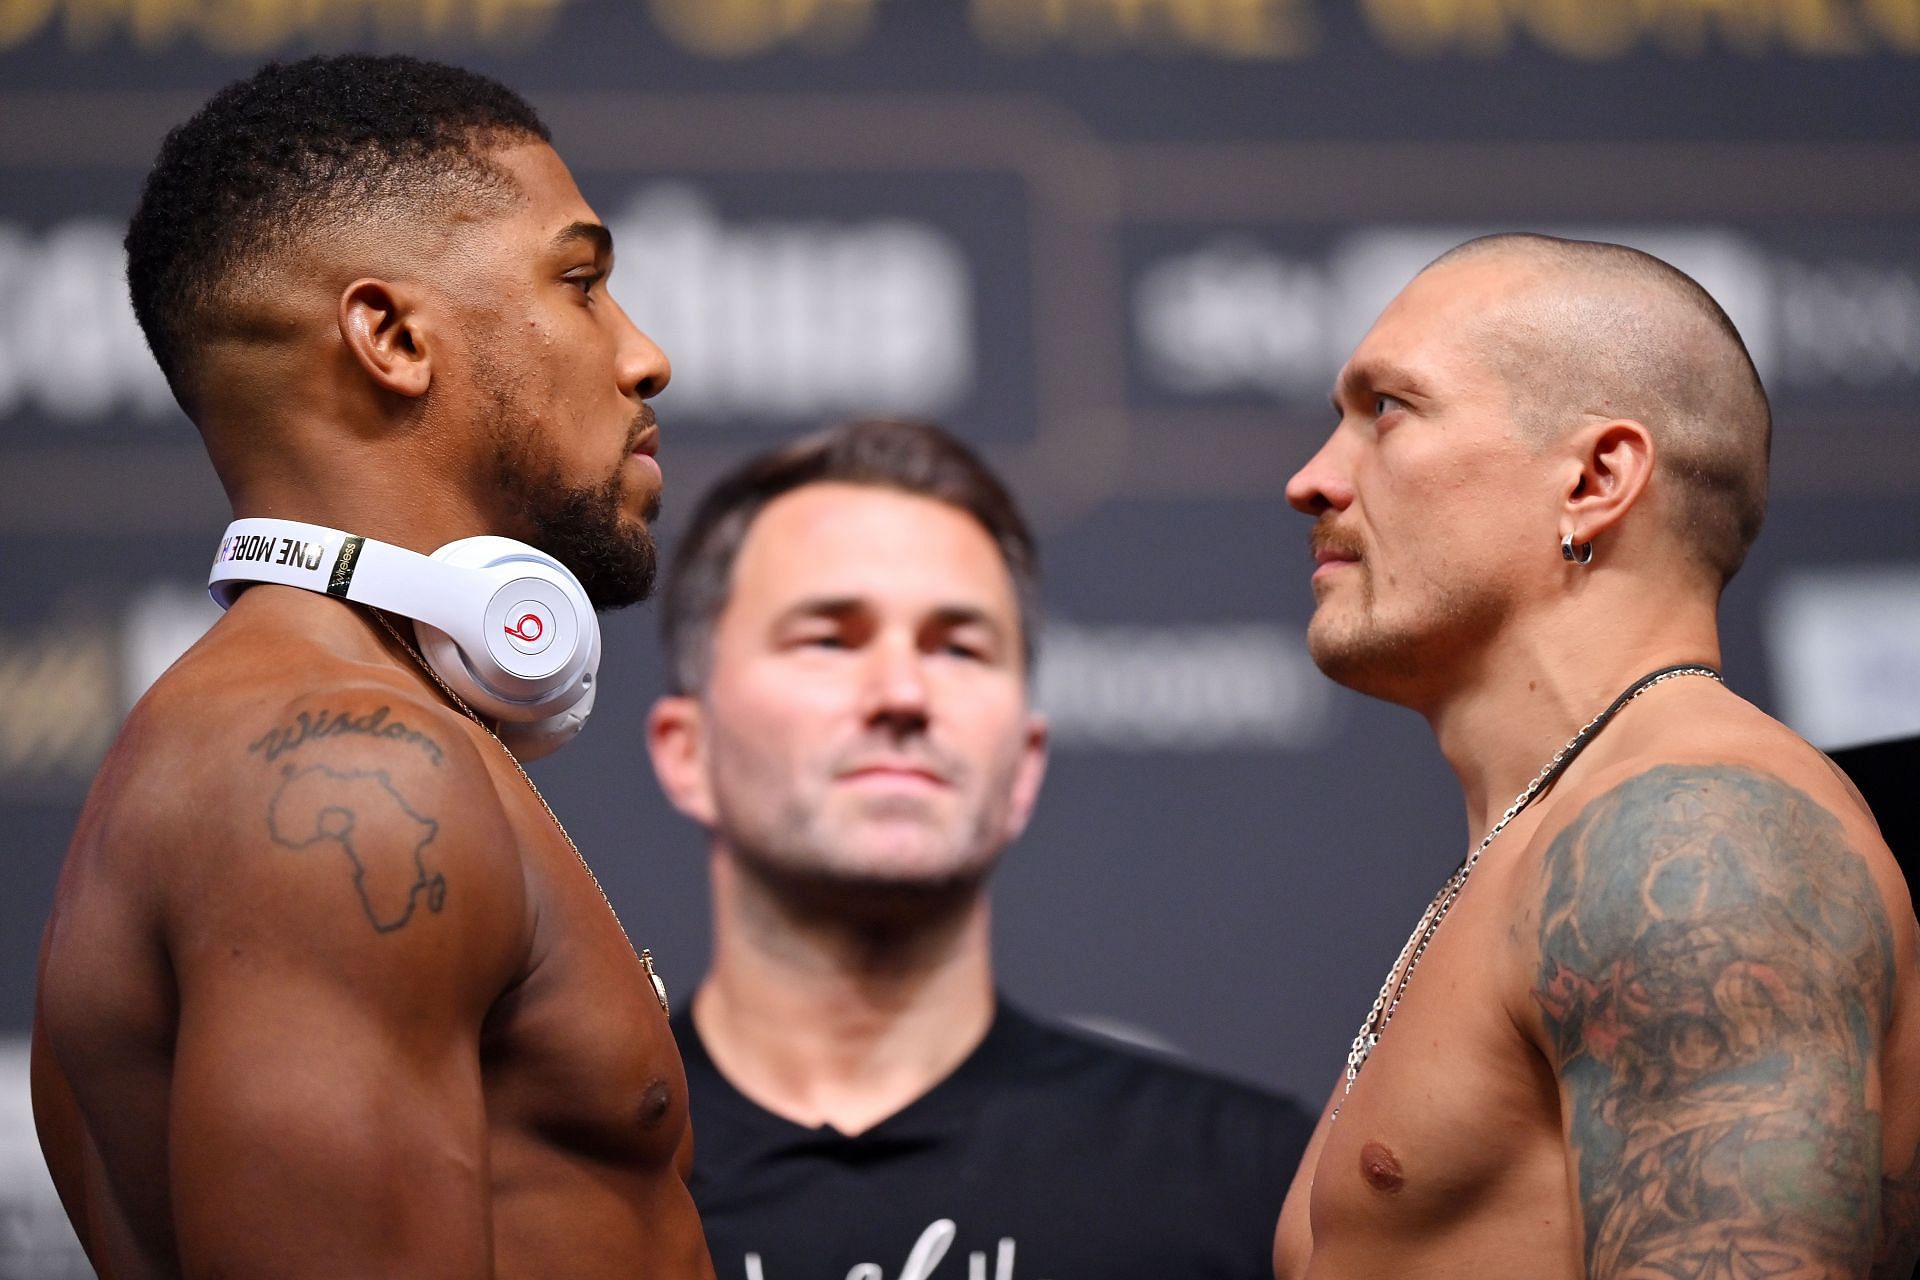 Enter caption Anthony Joshua and Oleksandr Usyk face off before their first fight last September